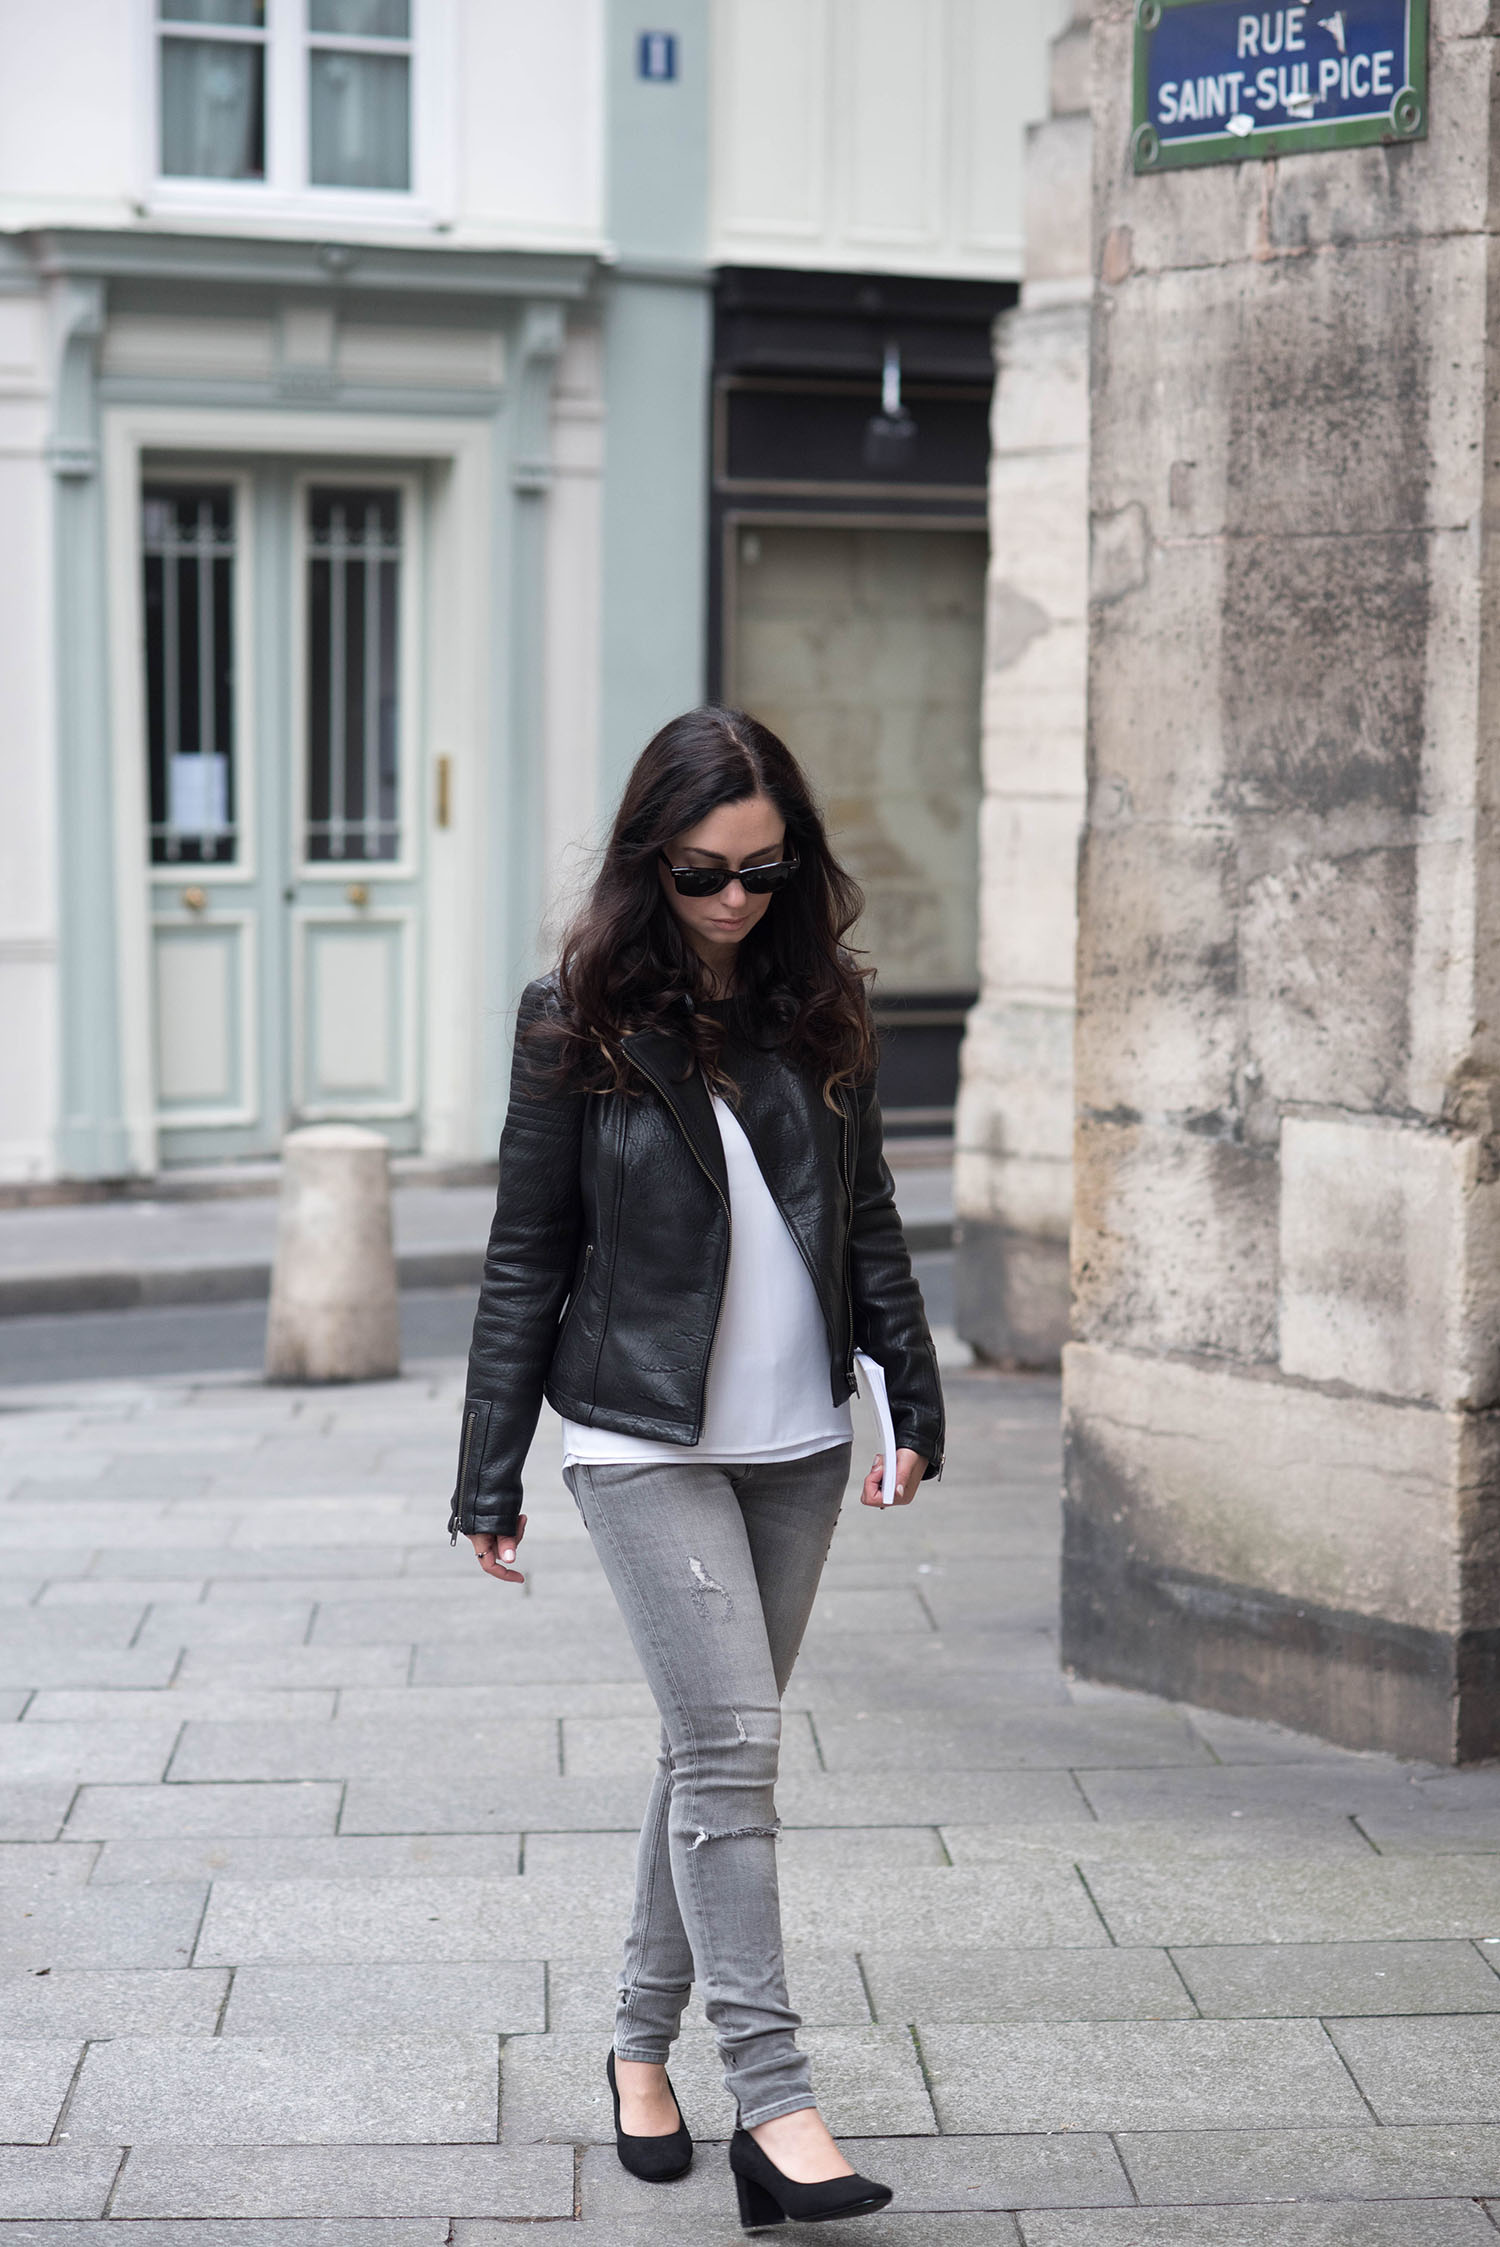 Lifestyle blogger Cee Fardoe of Coco & Vera walks in Paris wearing a leather jacket and Express Barcelona tank